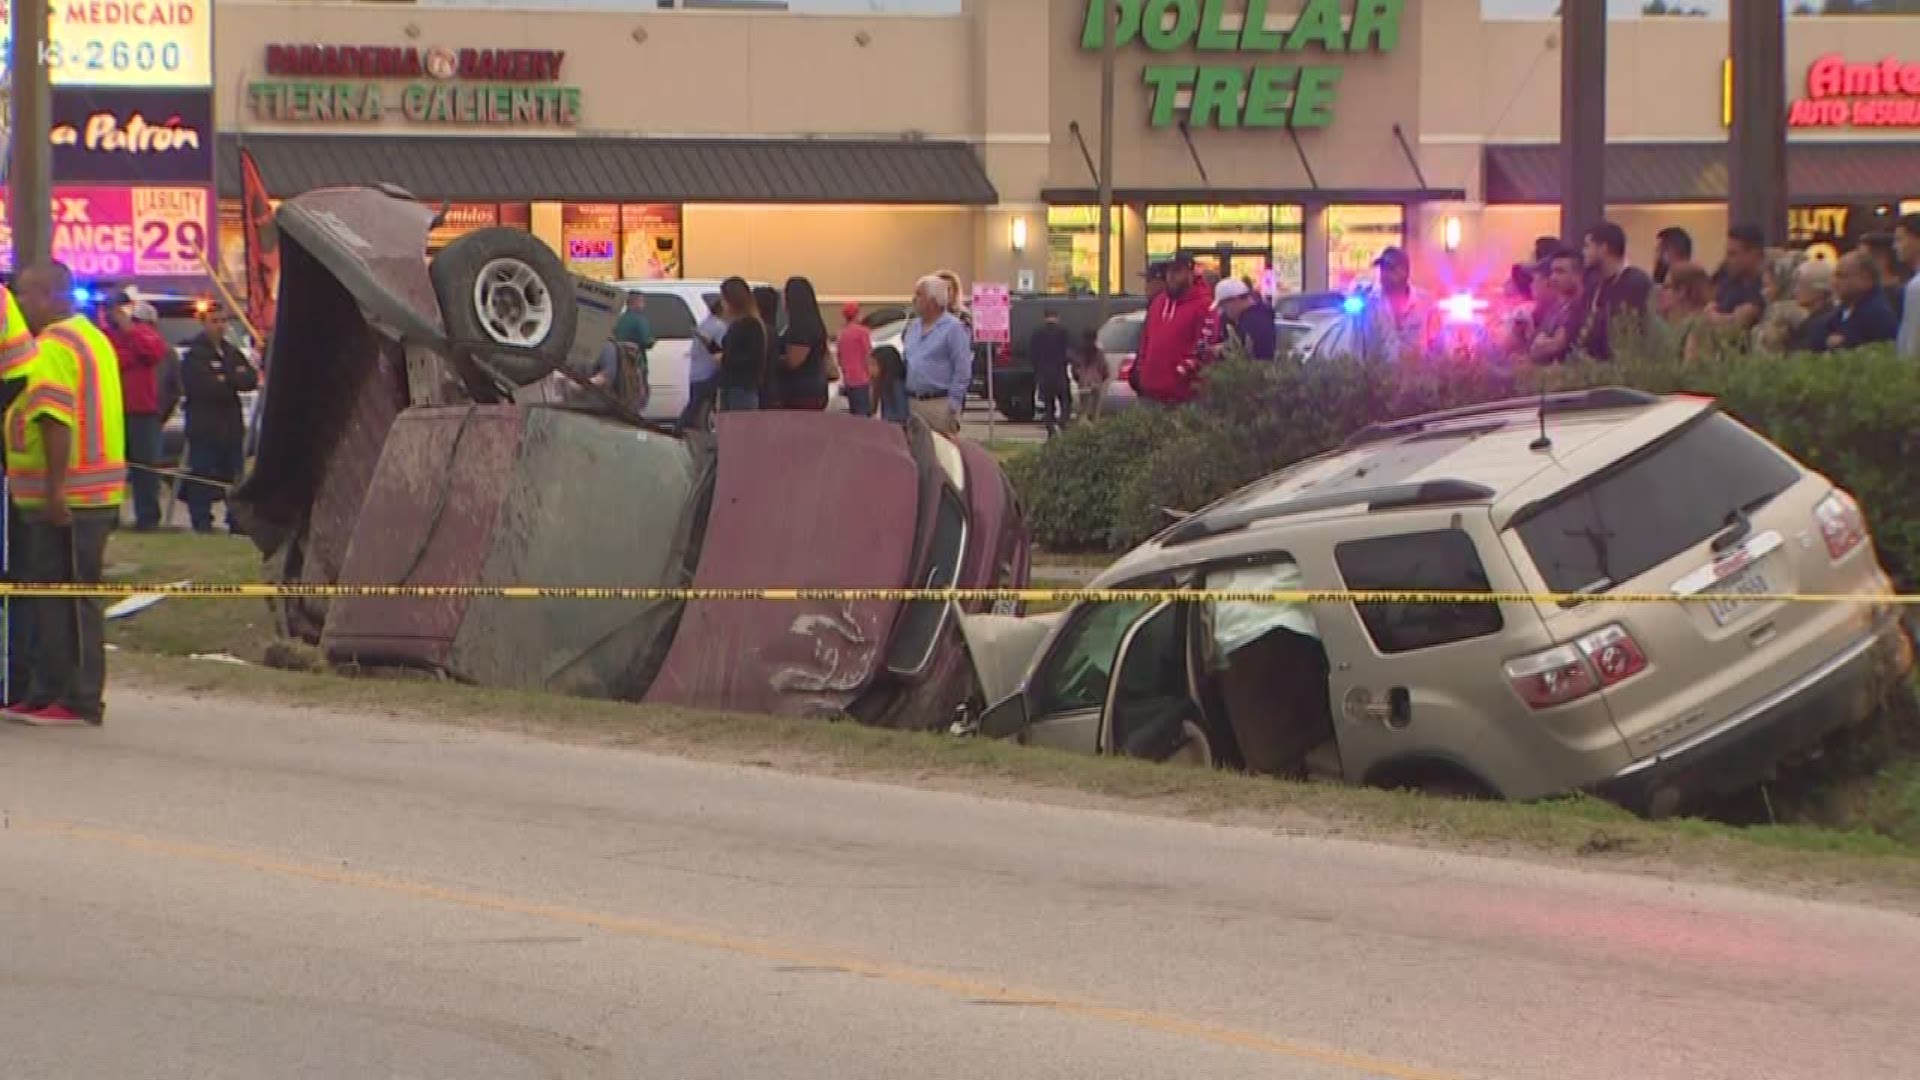 A 30-year-old woman was killed Tuesday after deputies say a teen driver T-boned her truck at an intersection in Aldine.